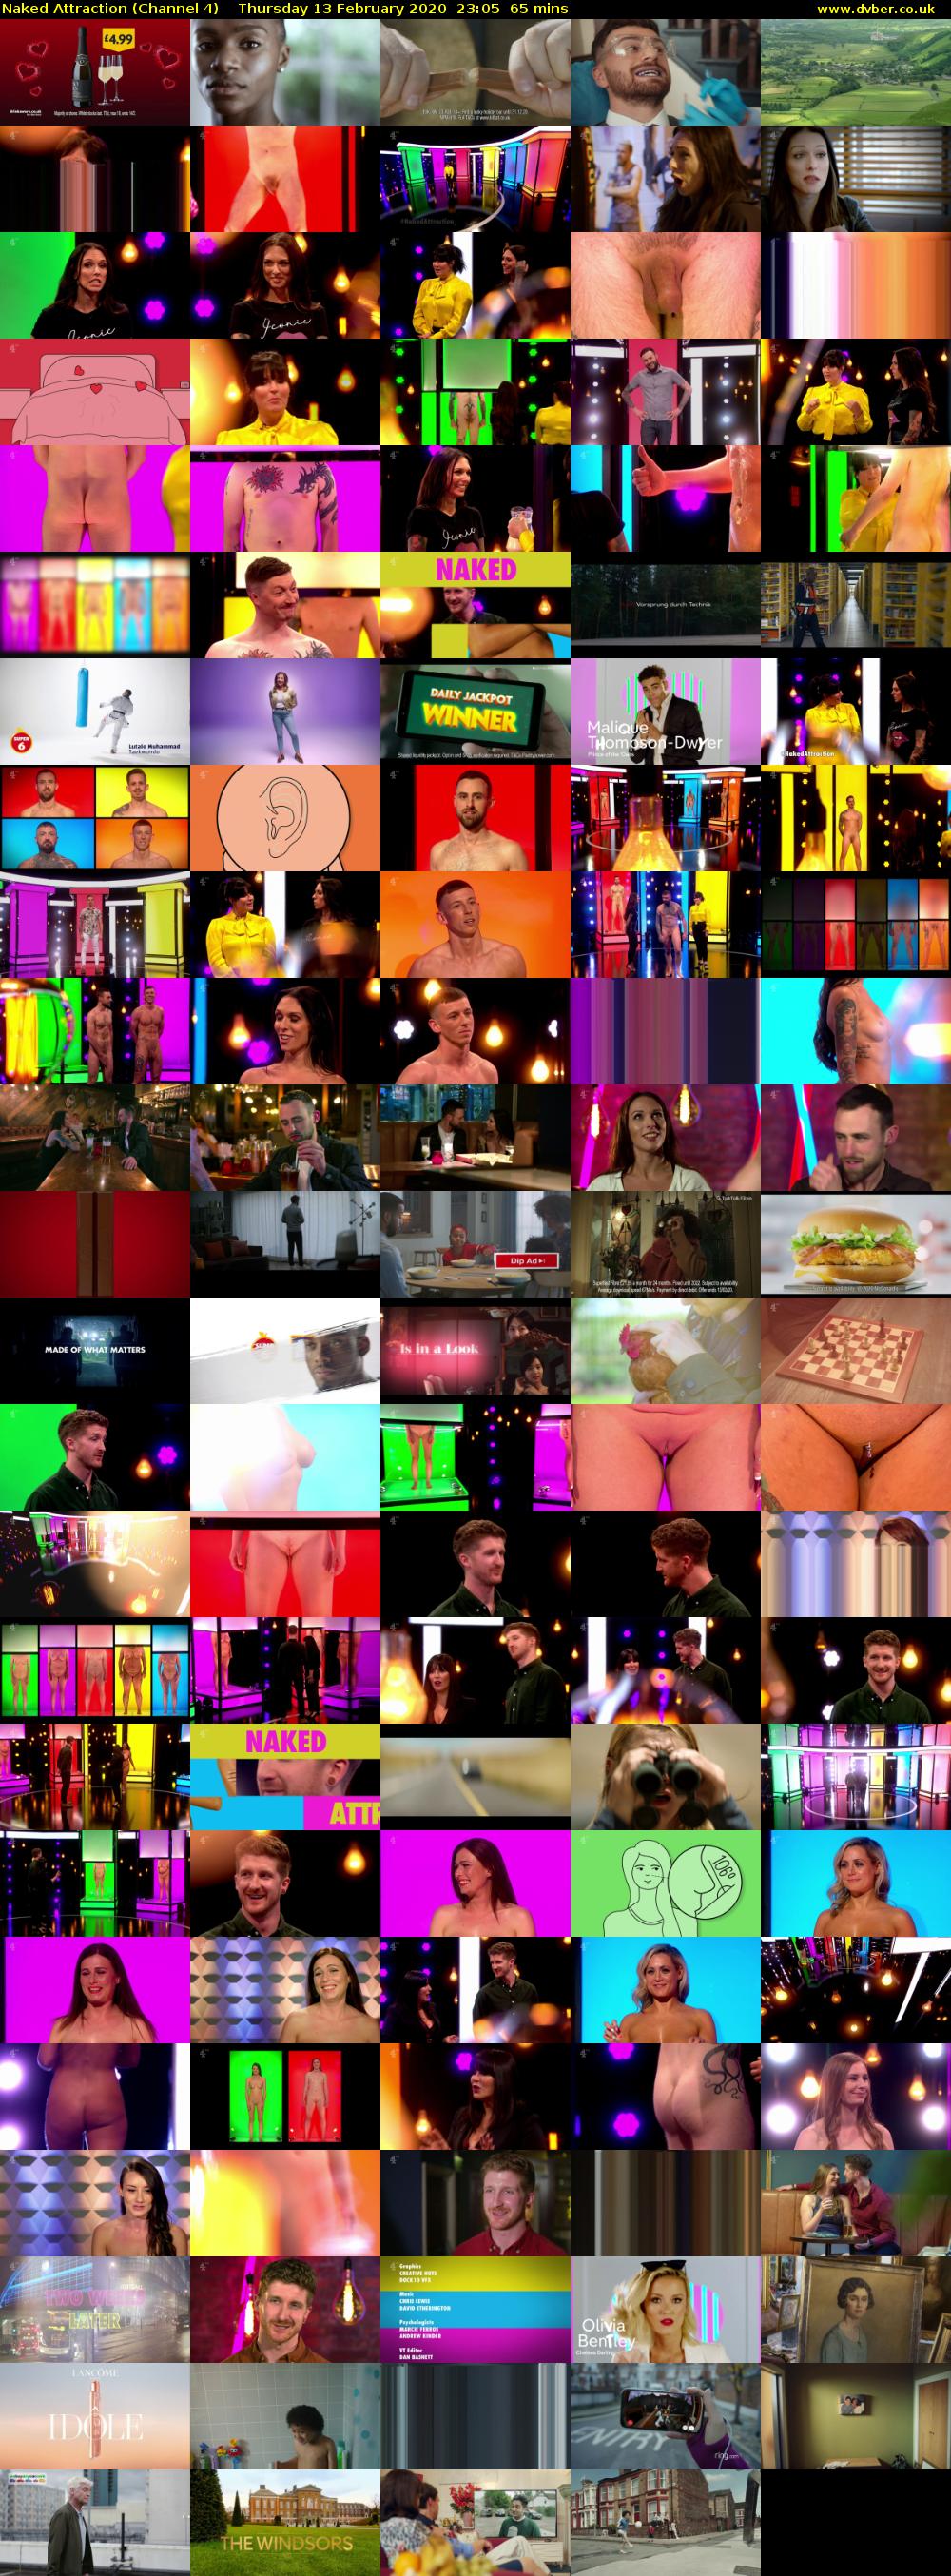 Naked Attraction (Channel 4) Thursday 13 February 2020 23:05 - 00:10